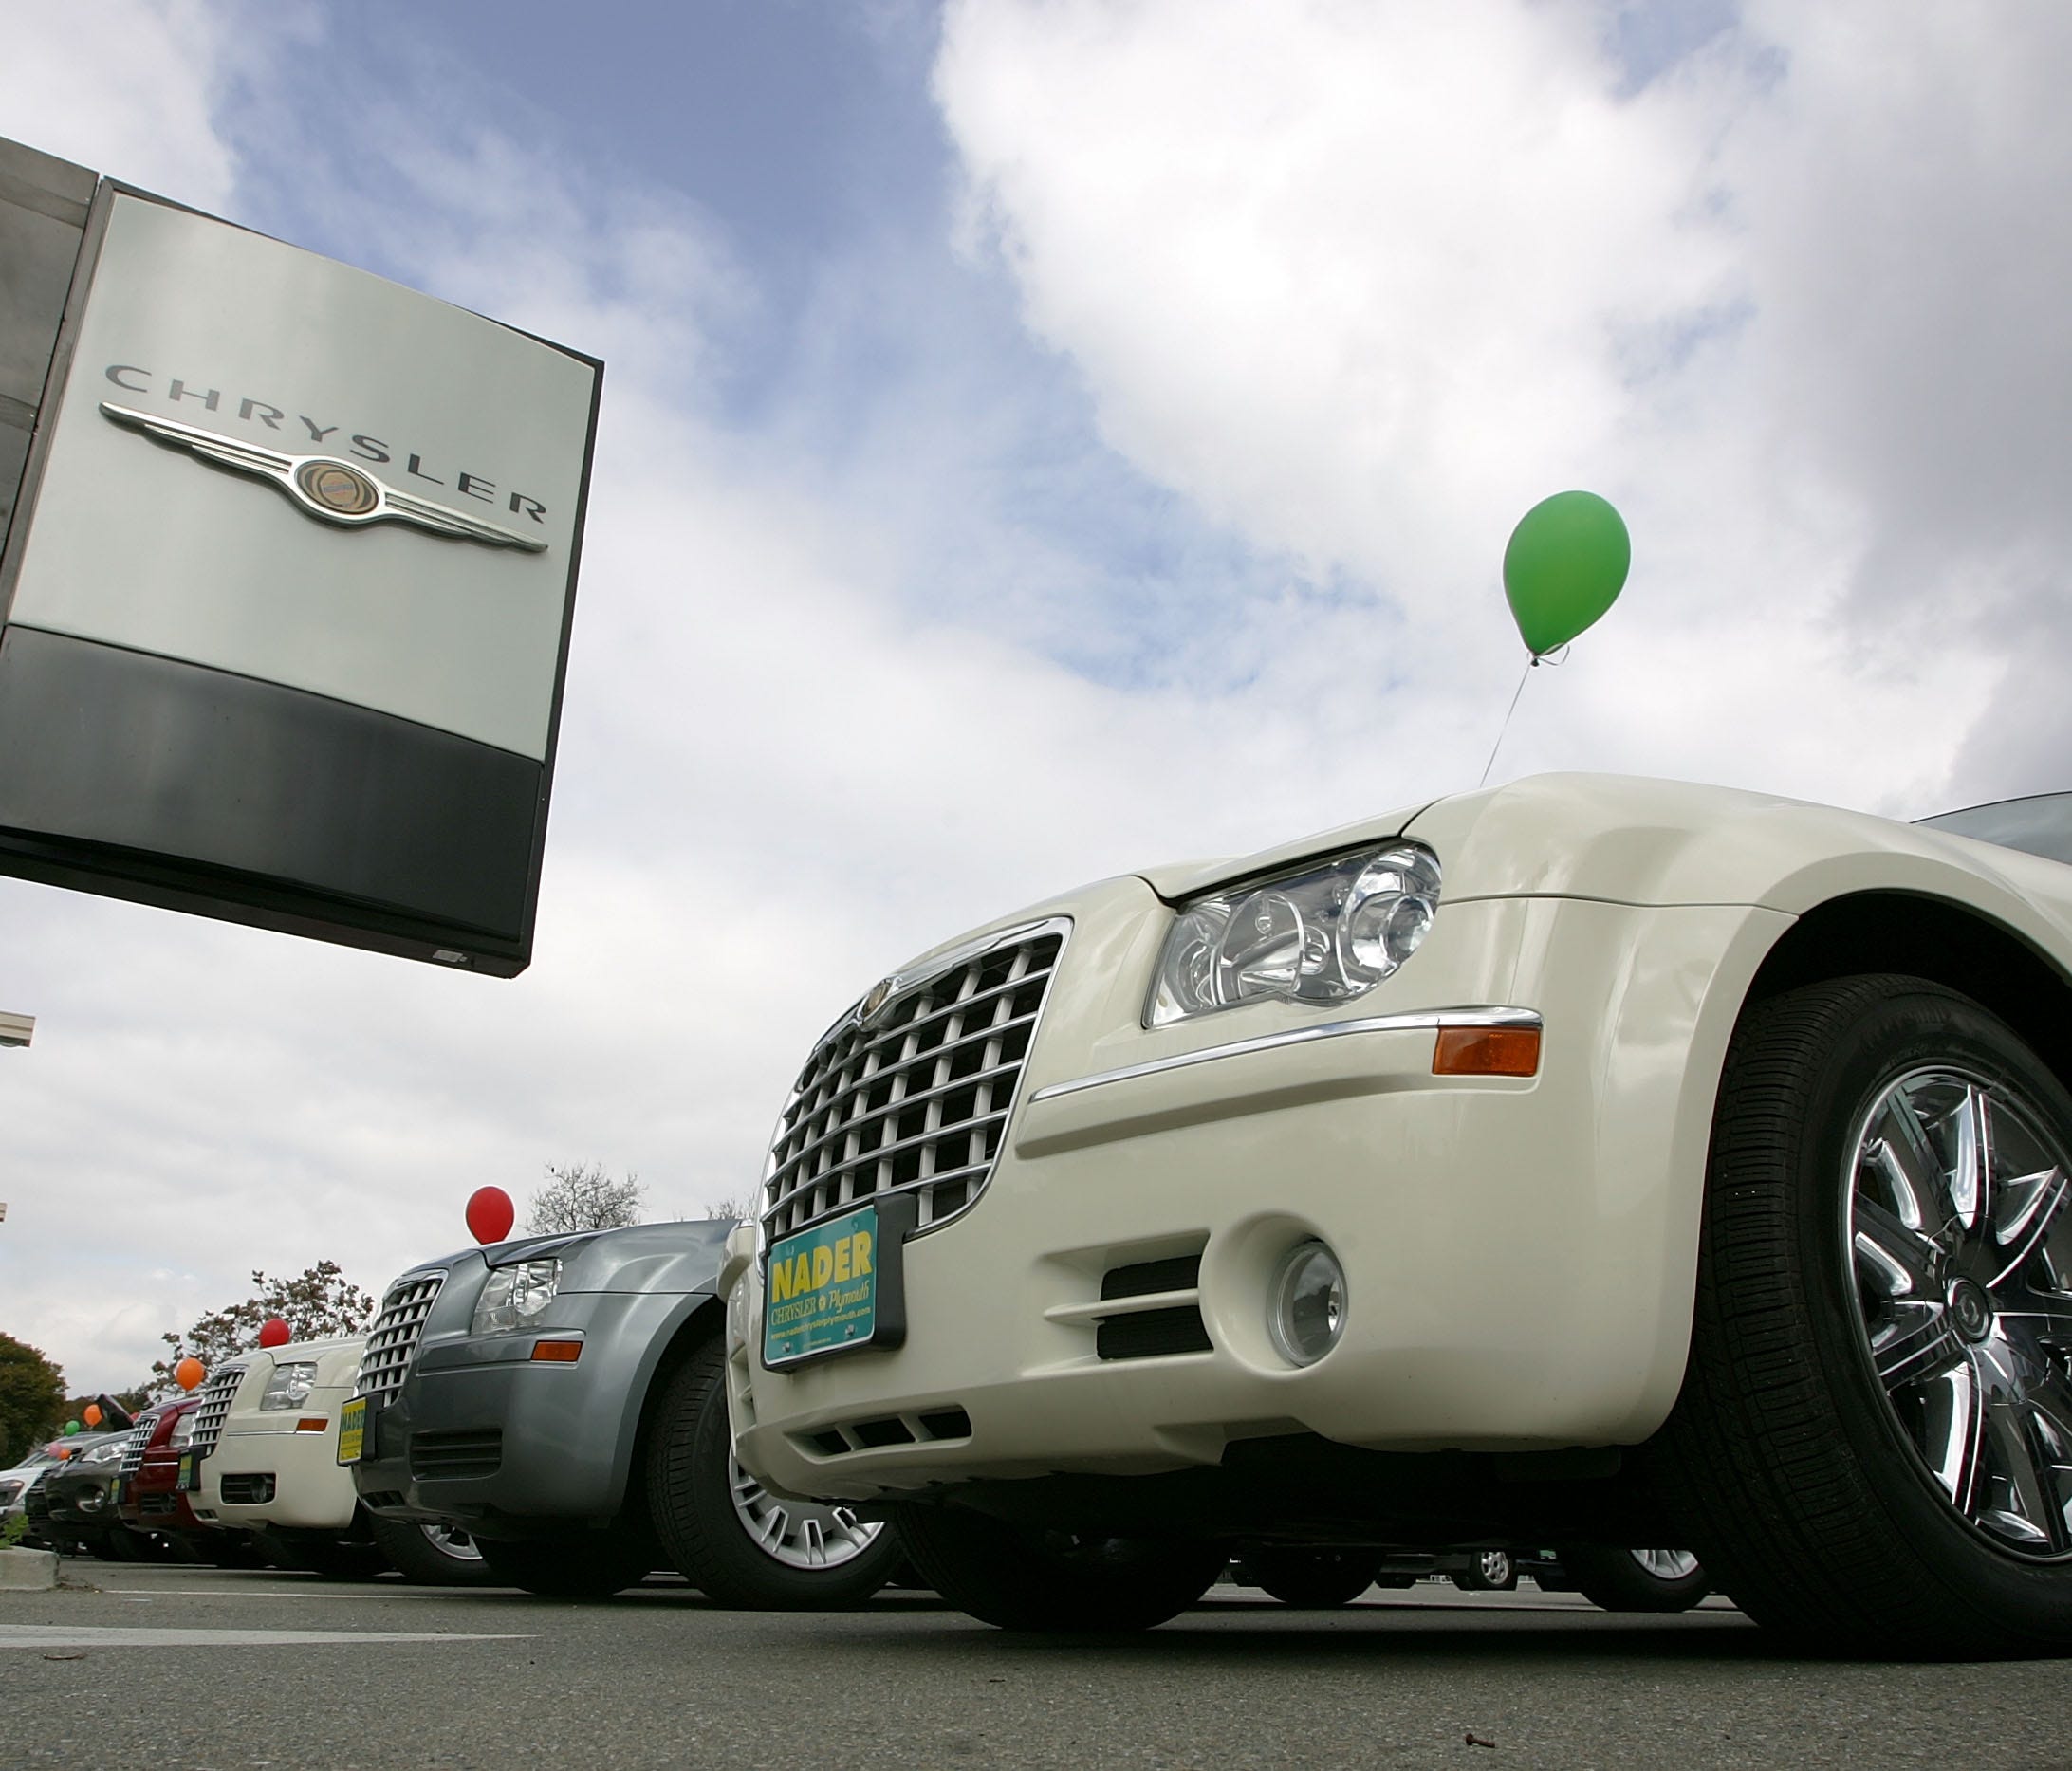 Cars are a tougher sell with gas prices low. Here's a Chrysler dealer in Martinez, Calif.